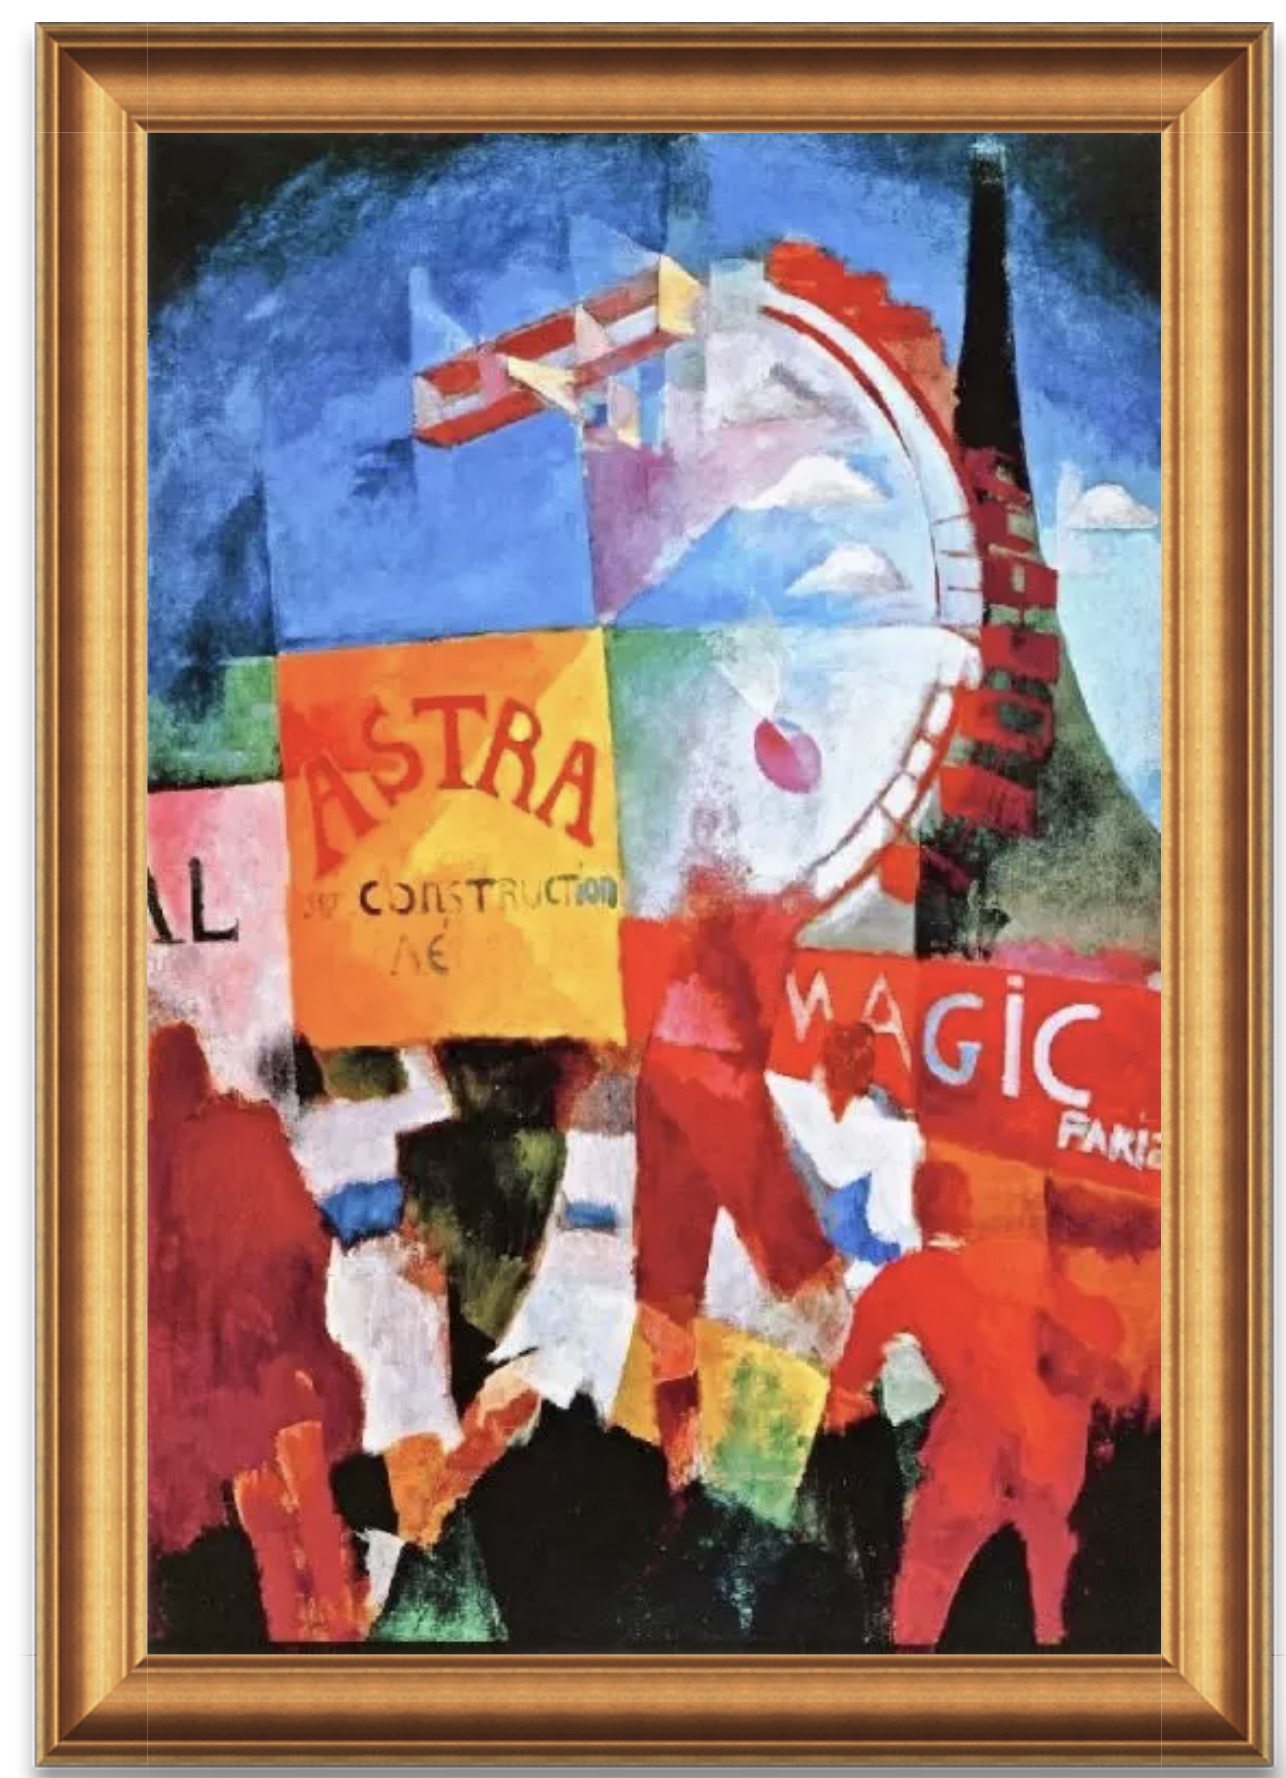 Robert Delaunay "The Cardiff Team, 1913" Oil Painting, After